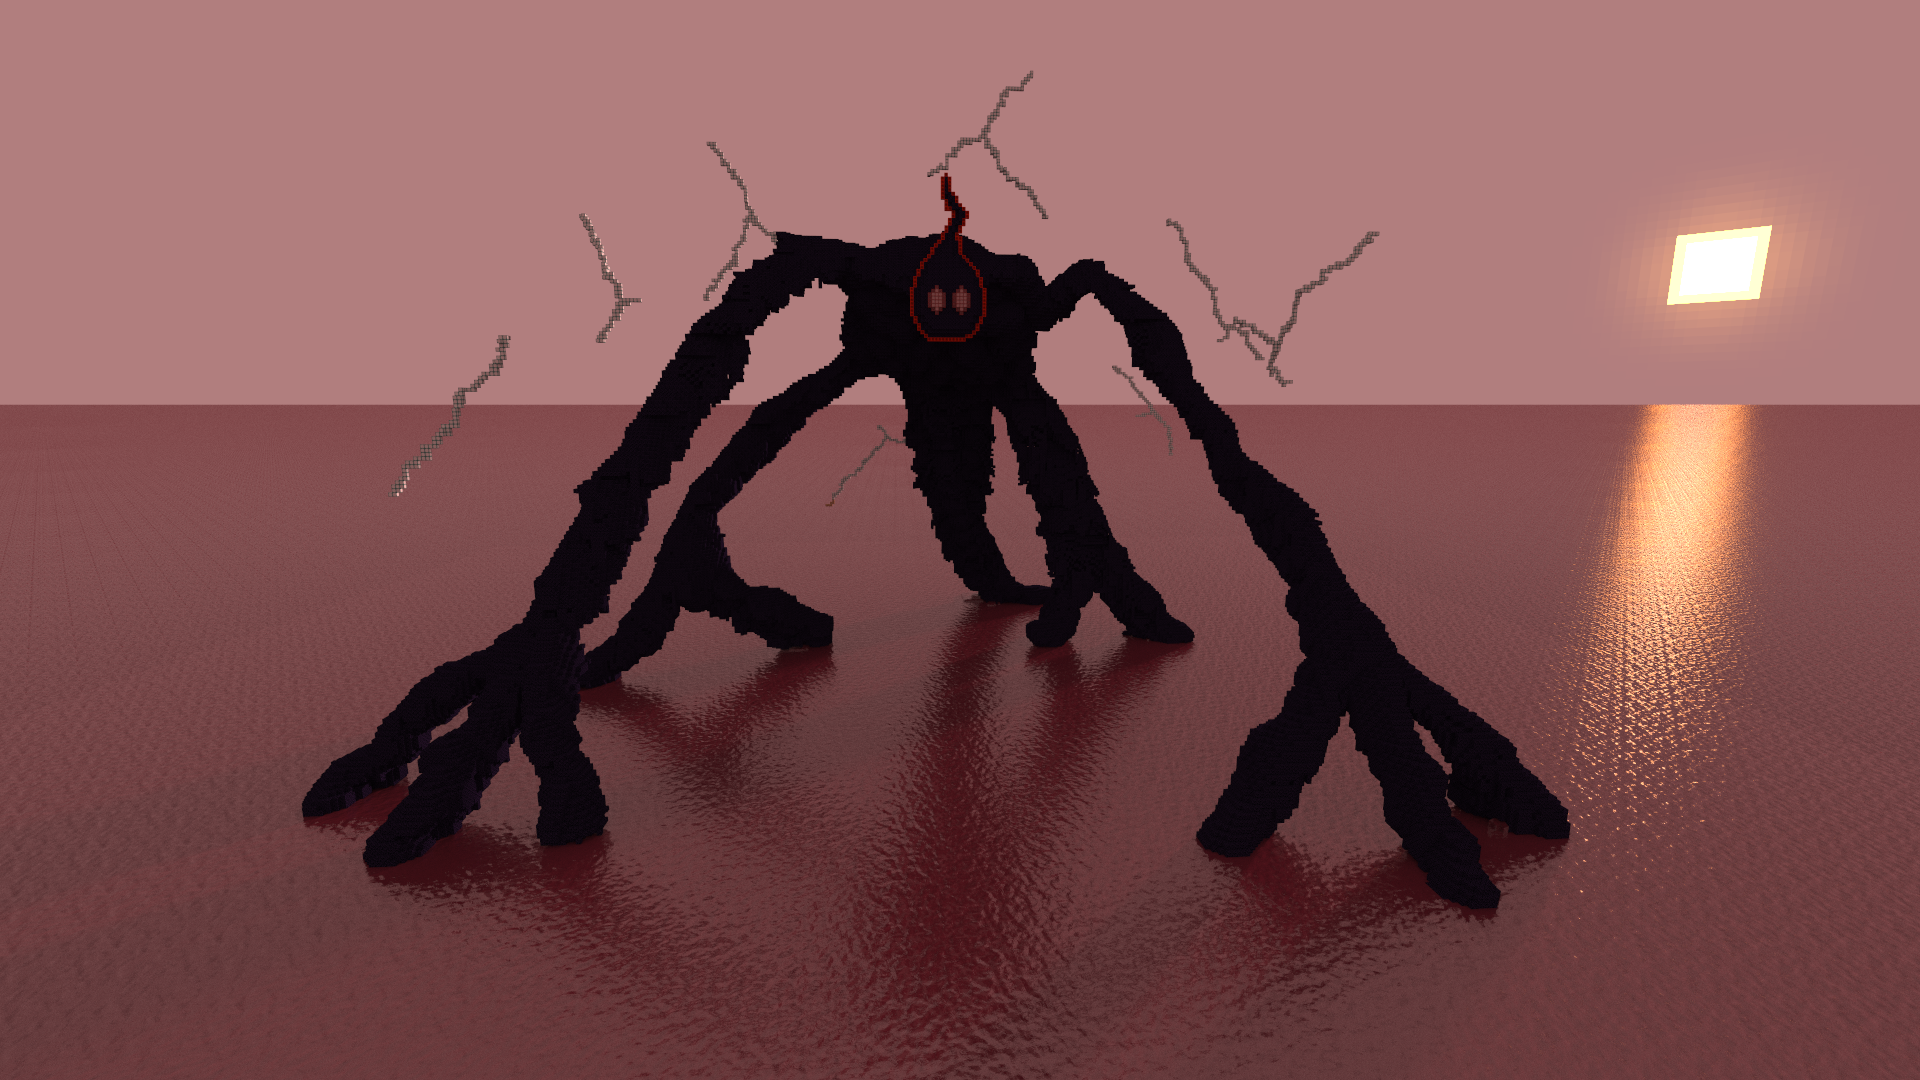 Tried Replicating A Drawing Of The Mind Flayer From Stranger Things. Even Tho Its Not Looking Like What I Wanted, It Was Fun